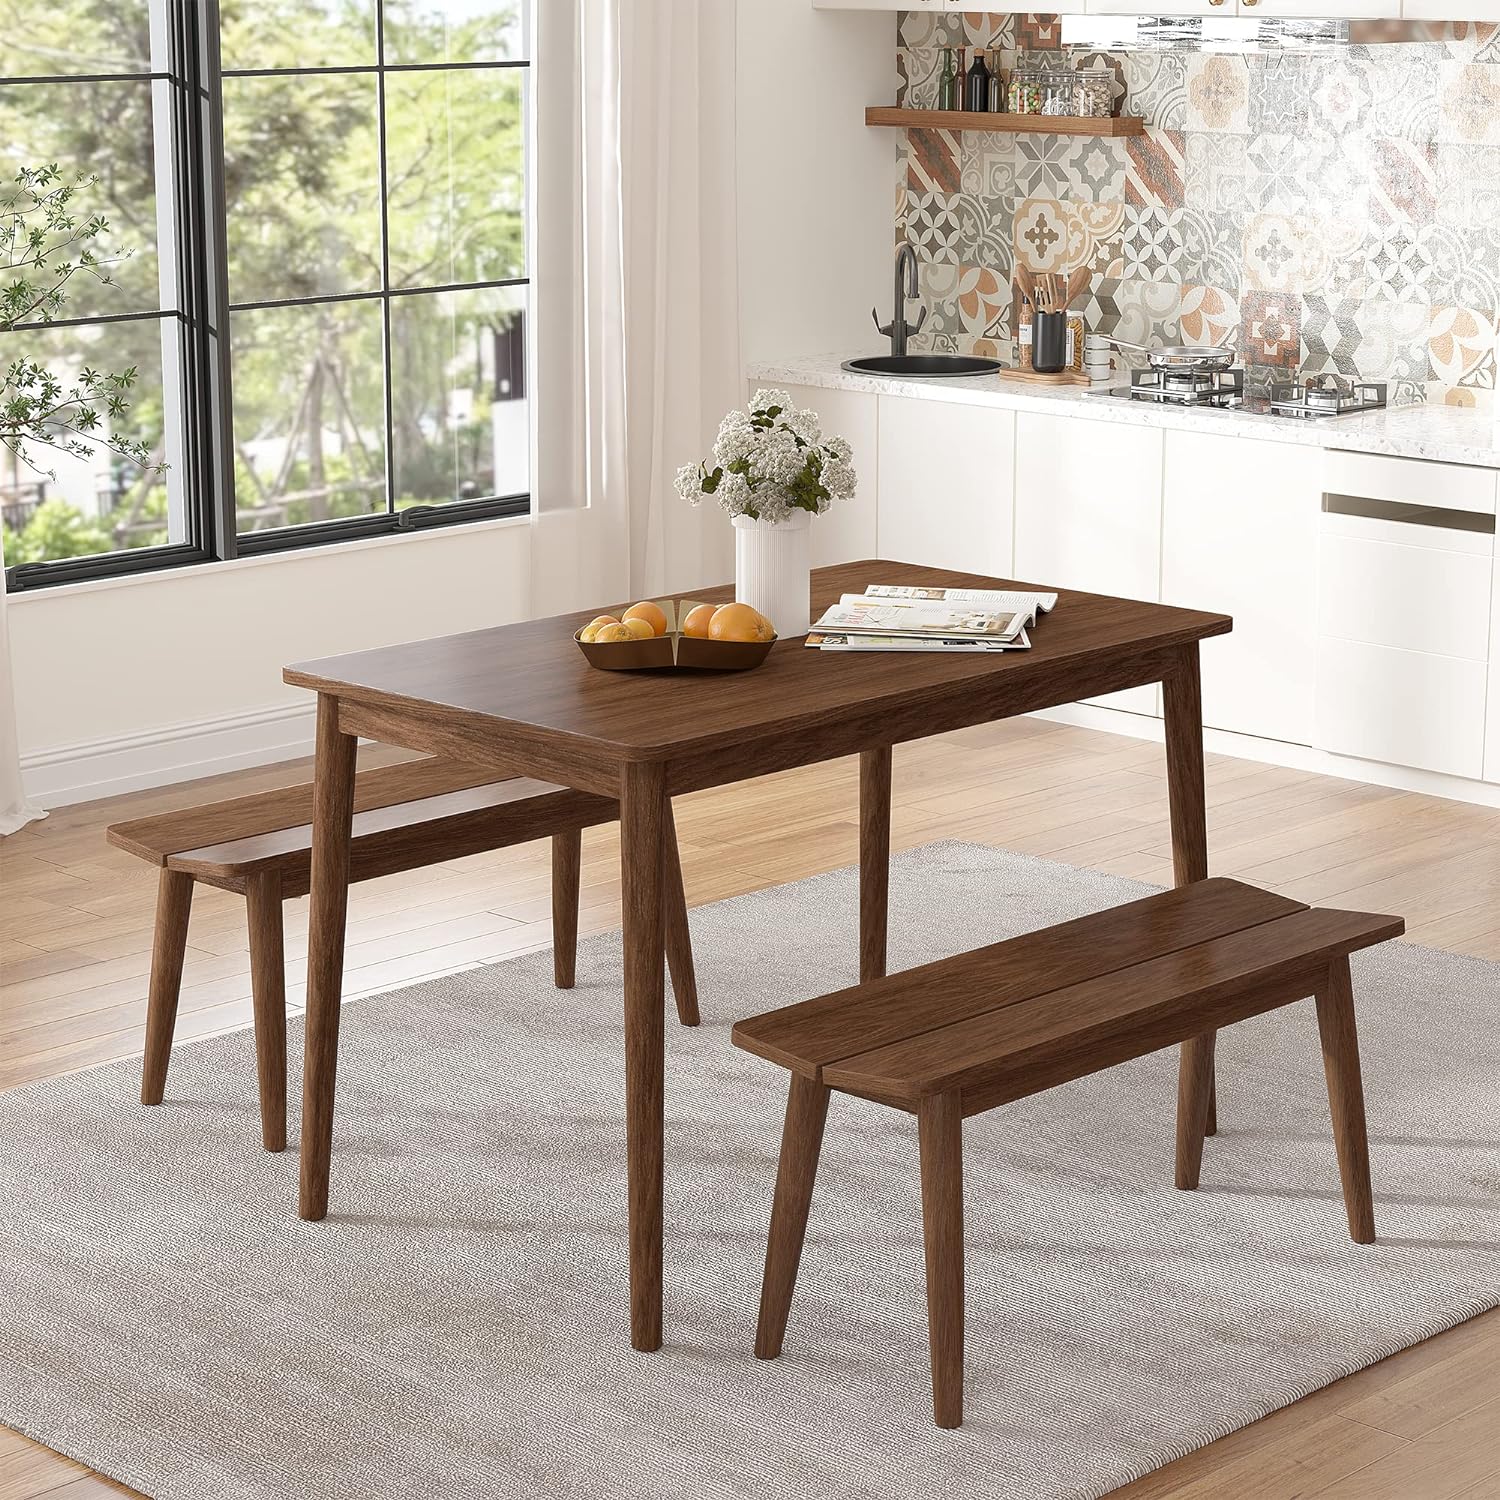 WILLIAMSPACE Dining Table Set for 4, 3-Piece Wooden Dining Table Set, Kitchen Furniture Modern Table with Spacious Tabletop, 2 Benches for Kitchen Dining Room (Walnut)